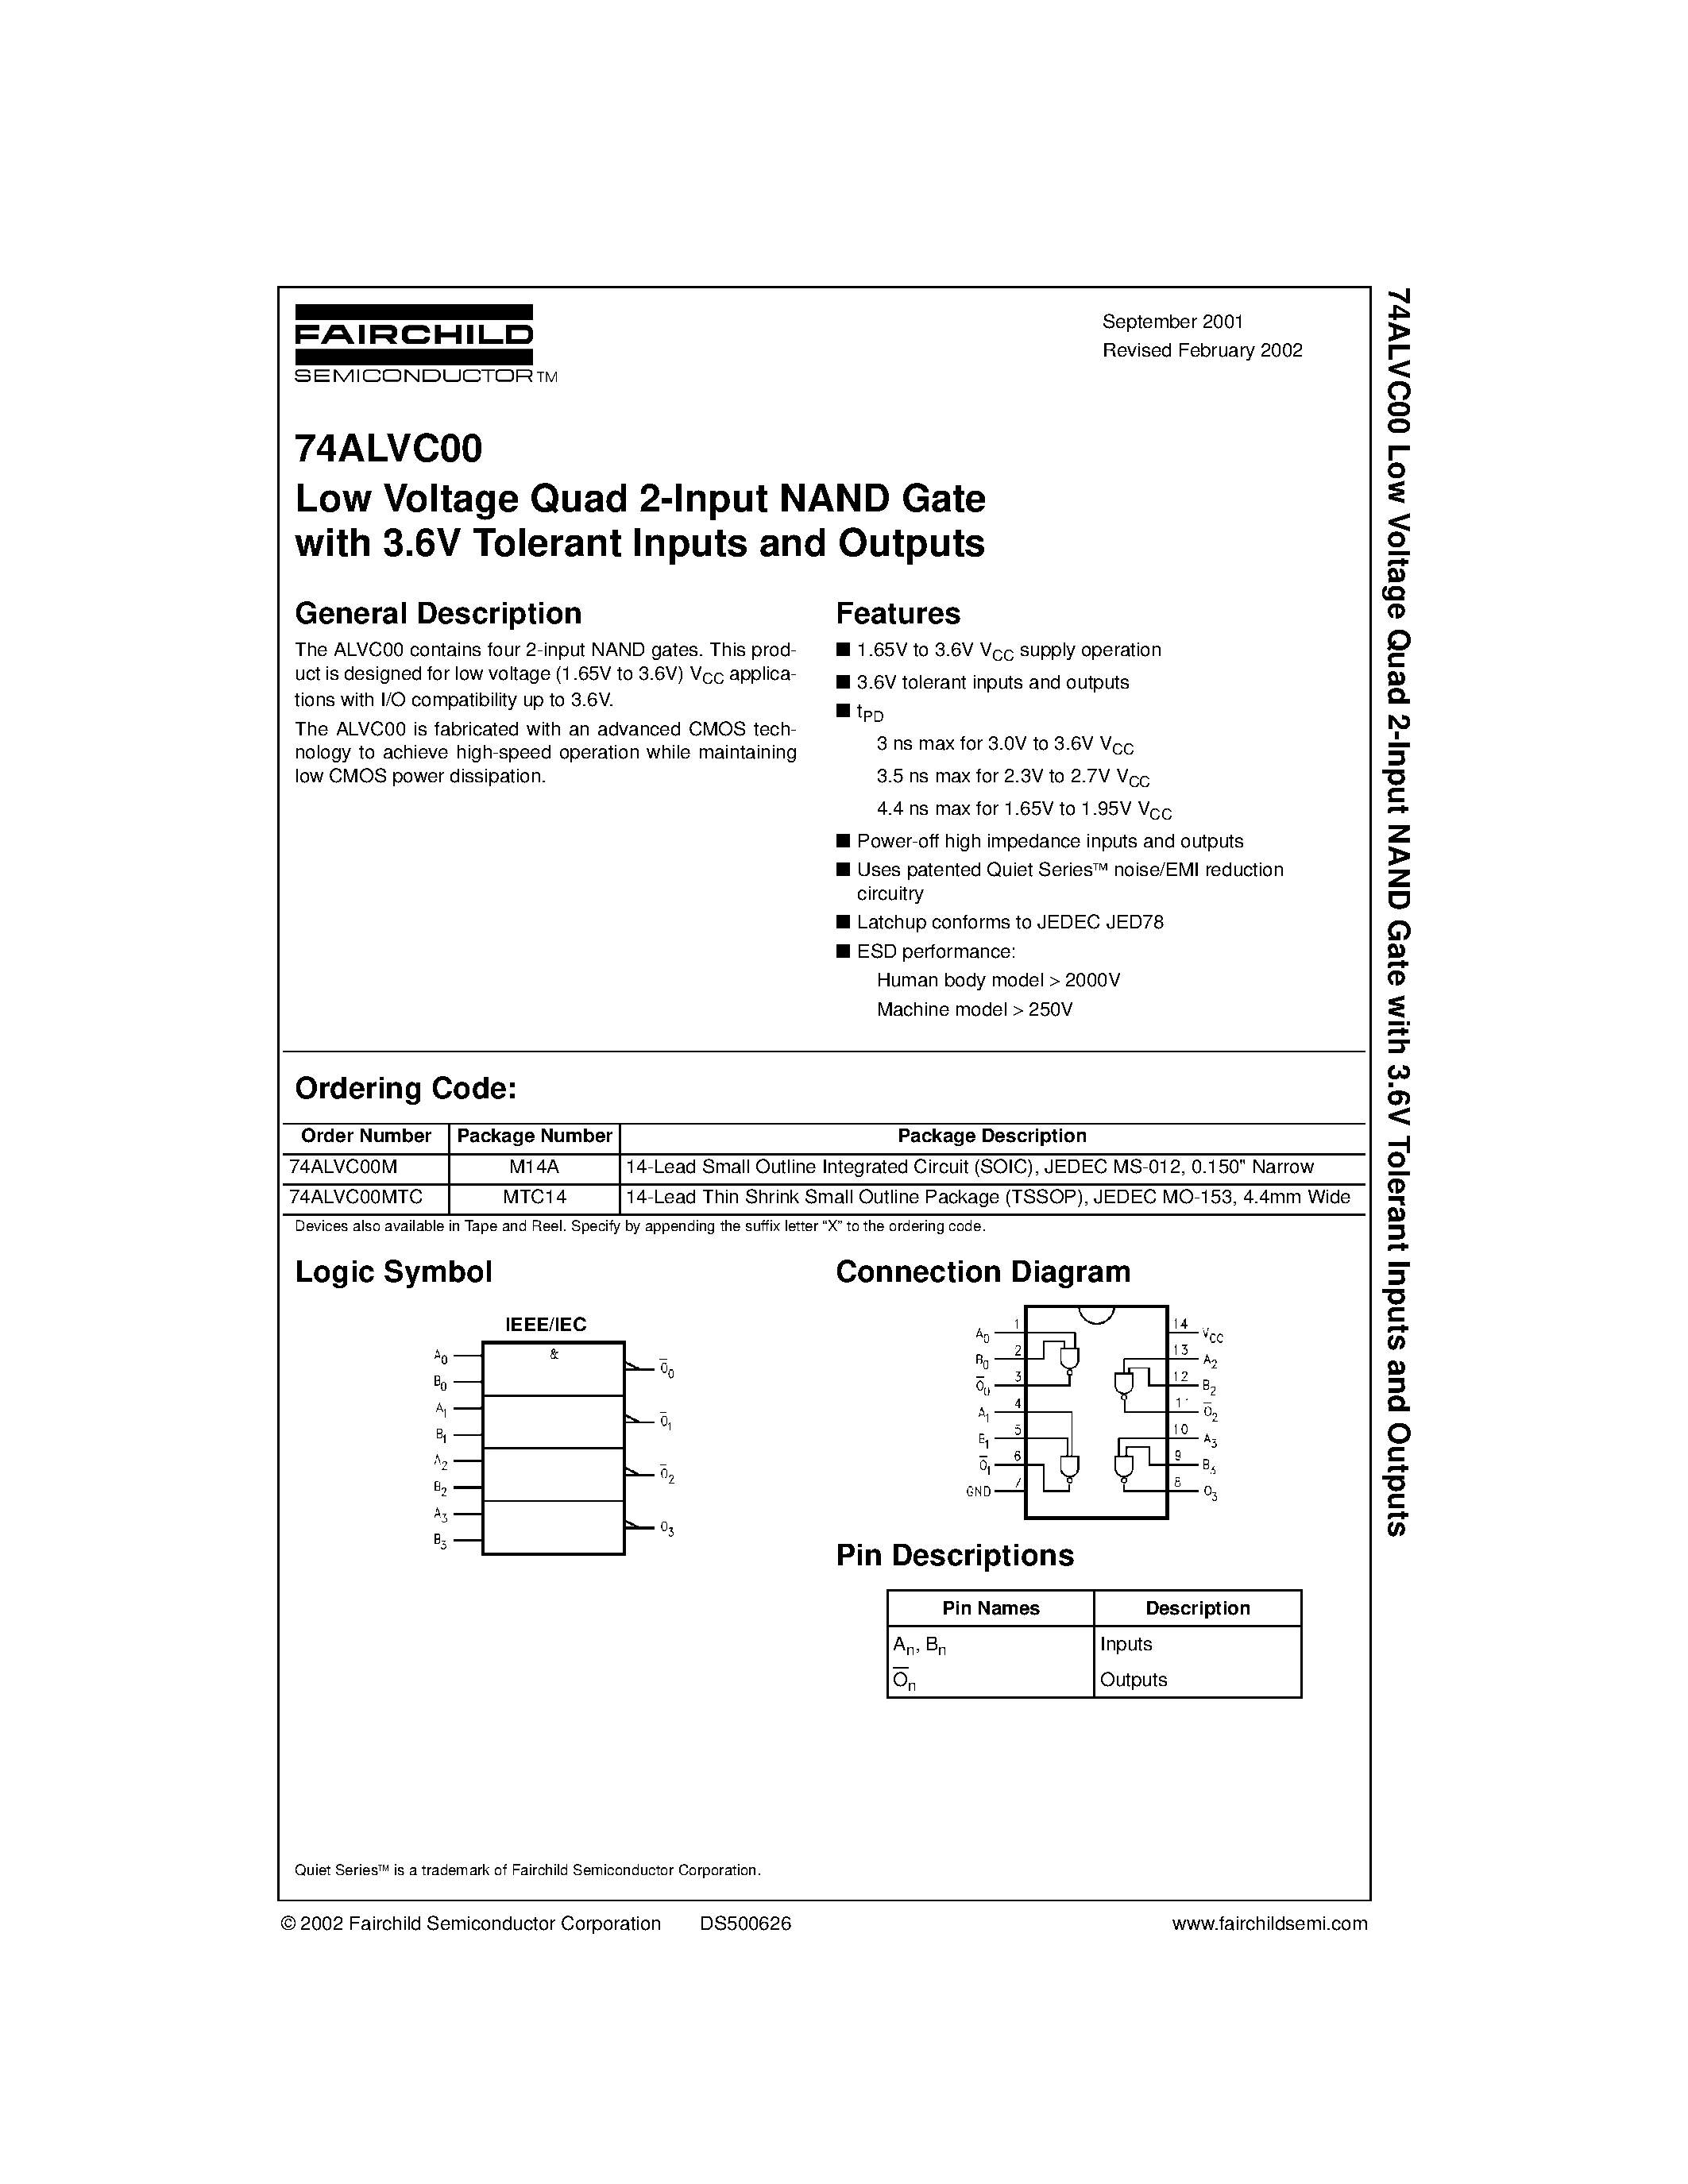 Datasheet 74ALVC00MTC - Low Voltage Quad 2-Input NAND Gate with 3.6V Tolerant Inputs and Outputs page 1